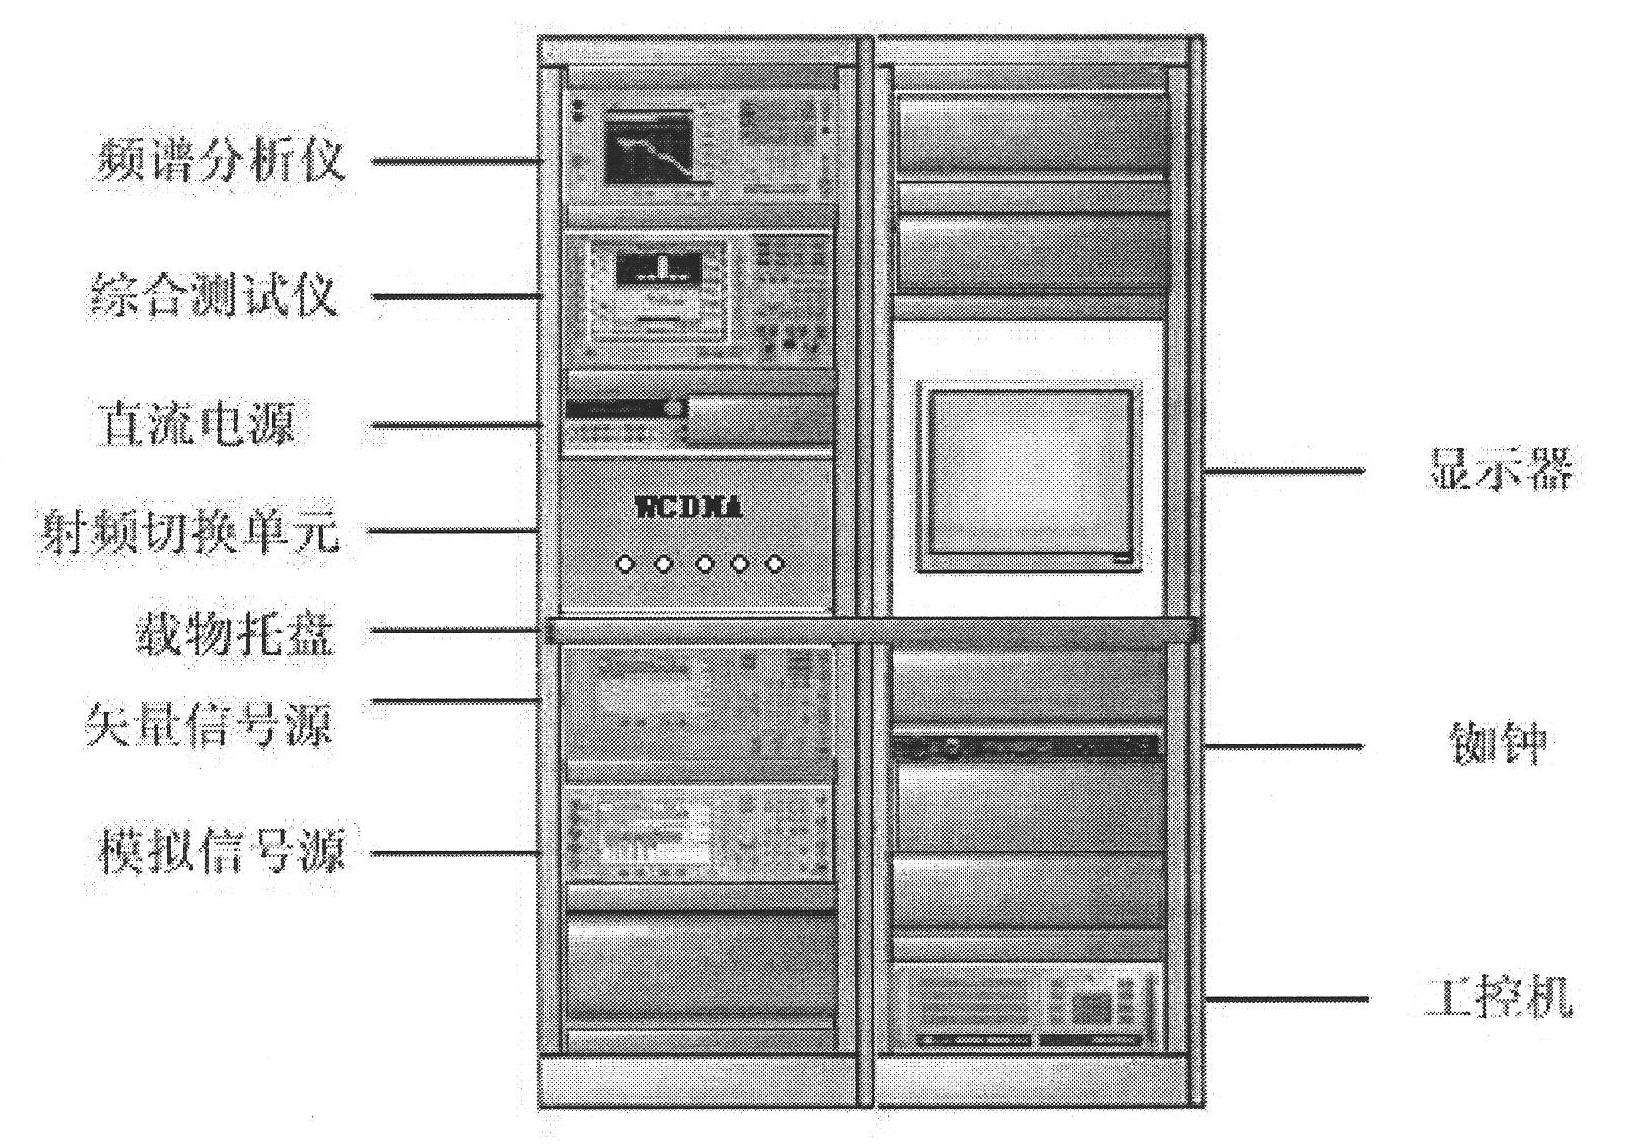 Radio frequency switching unit capable of being used for automatic testing of WCDMA (Wideband Code Division Multiple Access) /GSM (Global System for Mobile Communication) terminal radio frequency